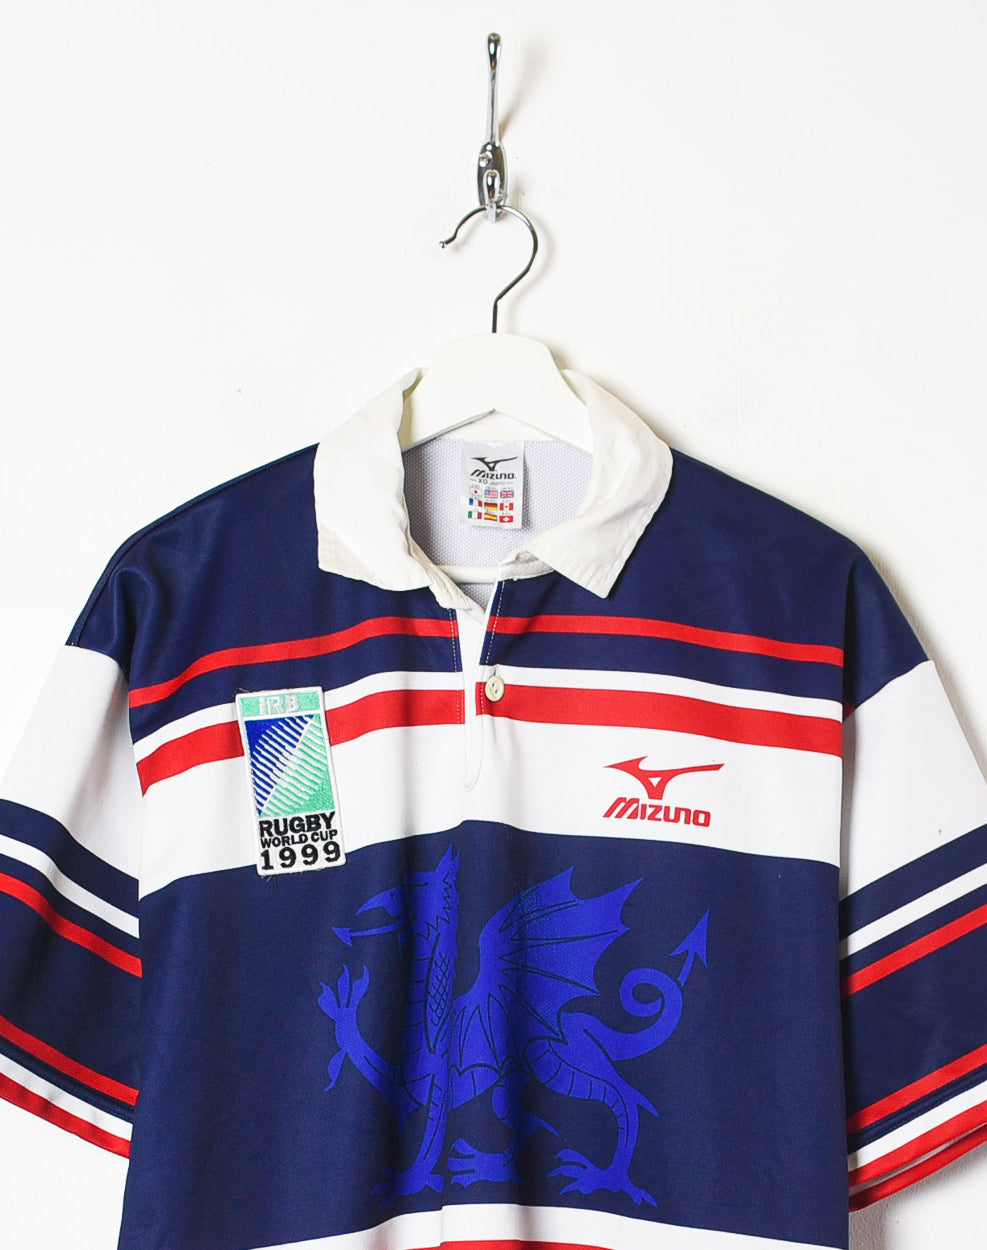 White Mizuno IRB Rugby World Cup 1999 Wales Polo Shirt - X-Large